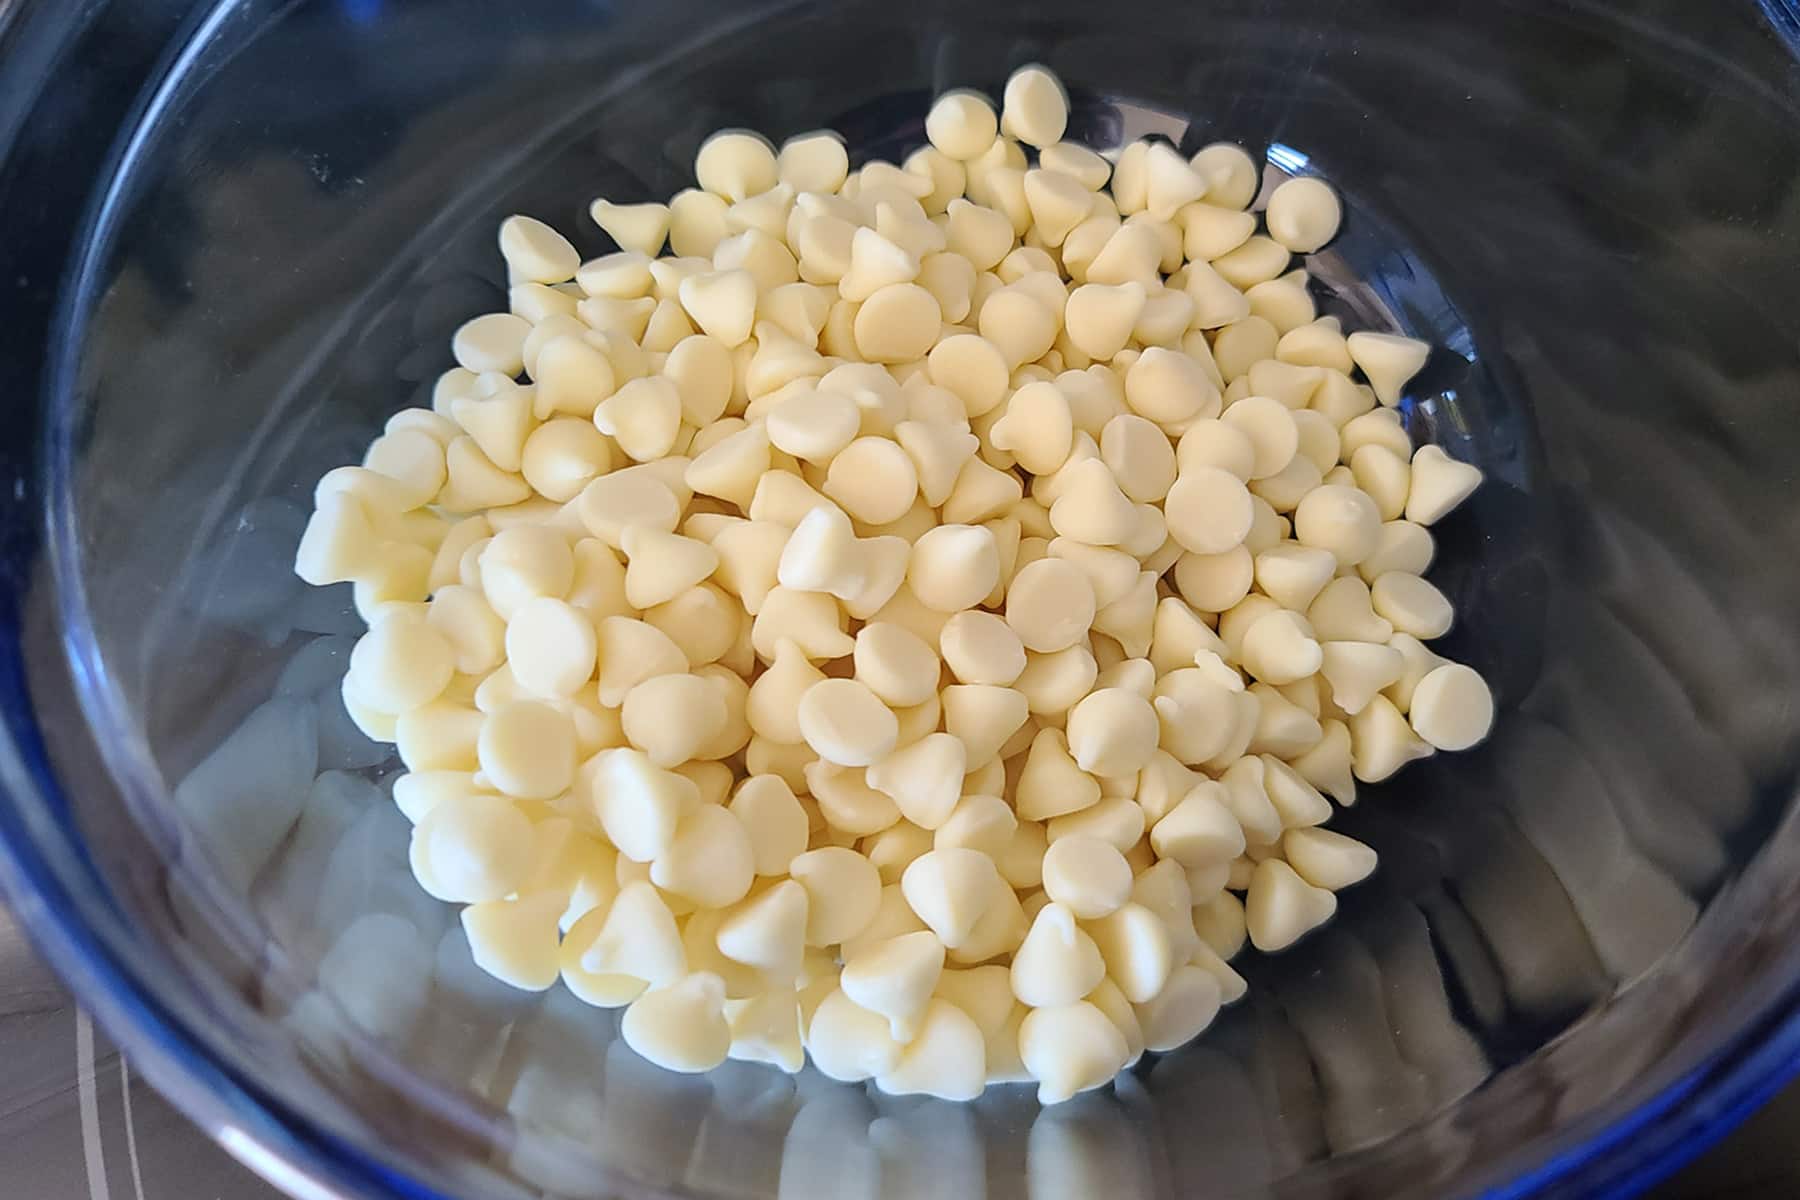 A bowl of white chocolate chips.